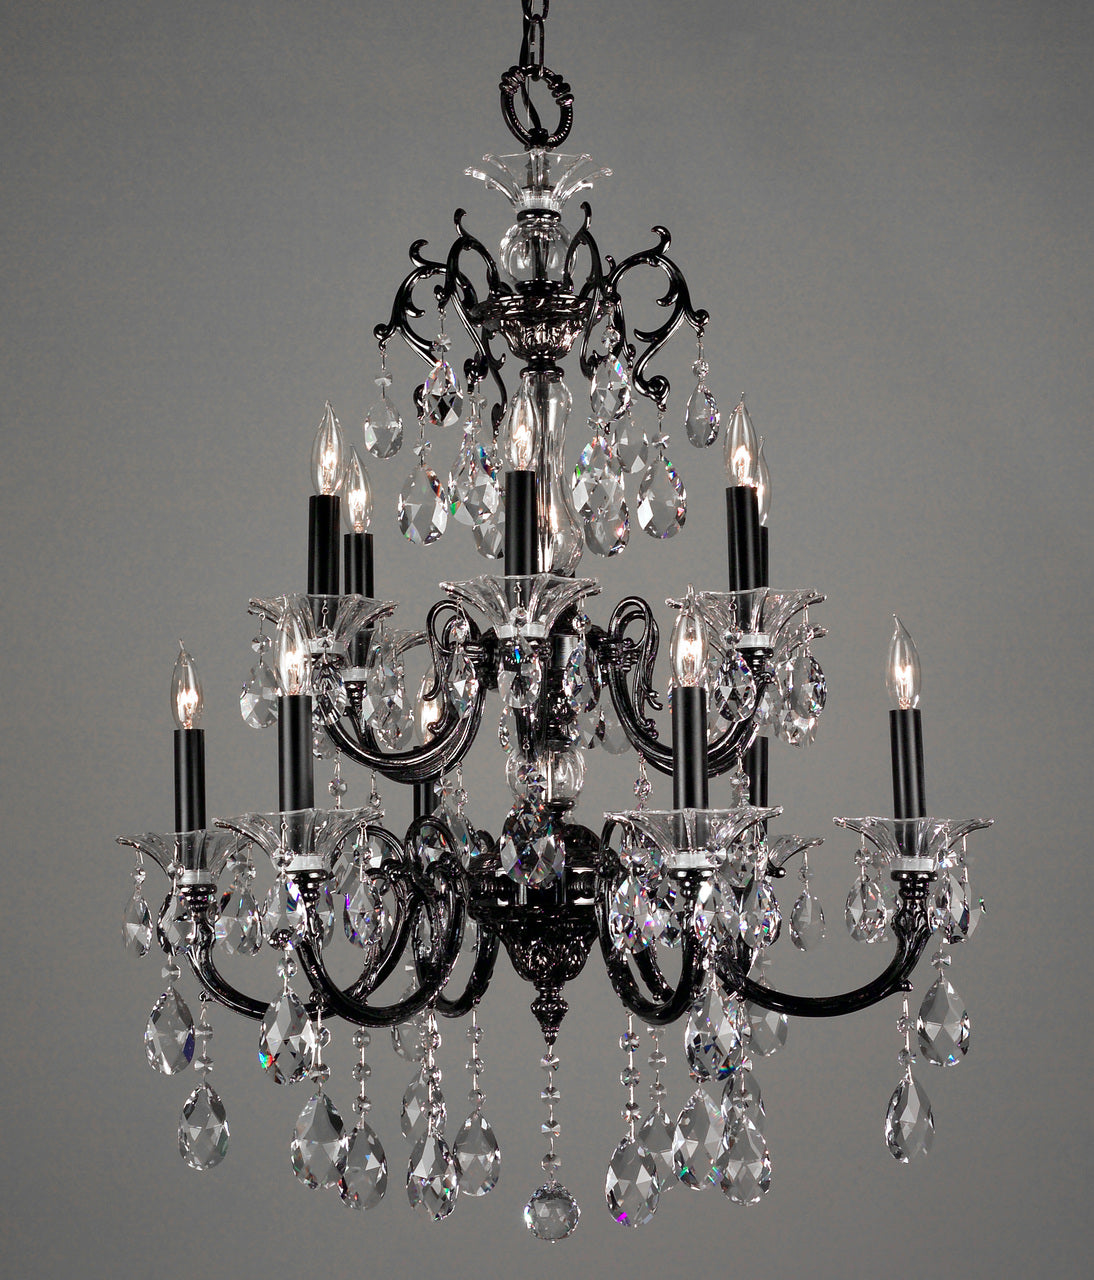 Classic Lighting 57062 G SJT Via Lombardi Crystal Chandelier in 24k Gold (Imported from Spain)